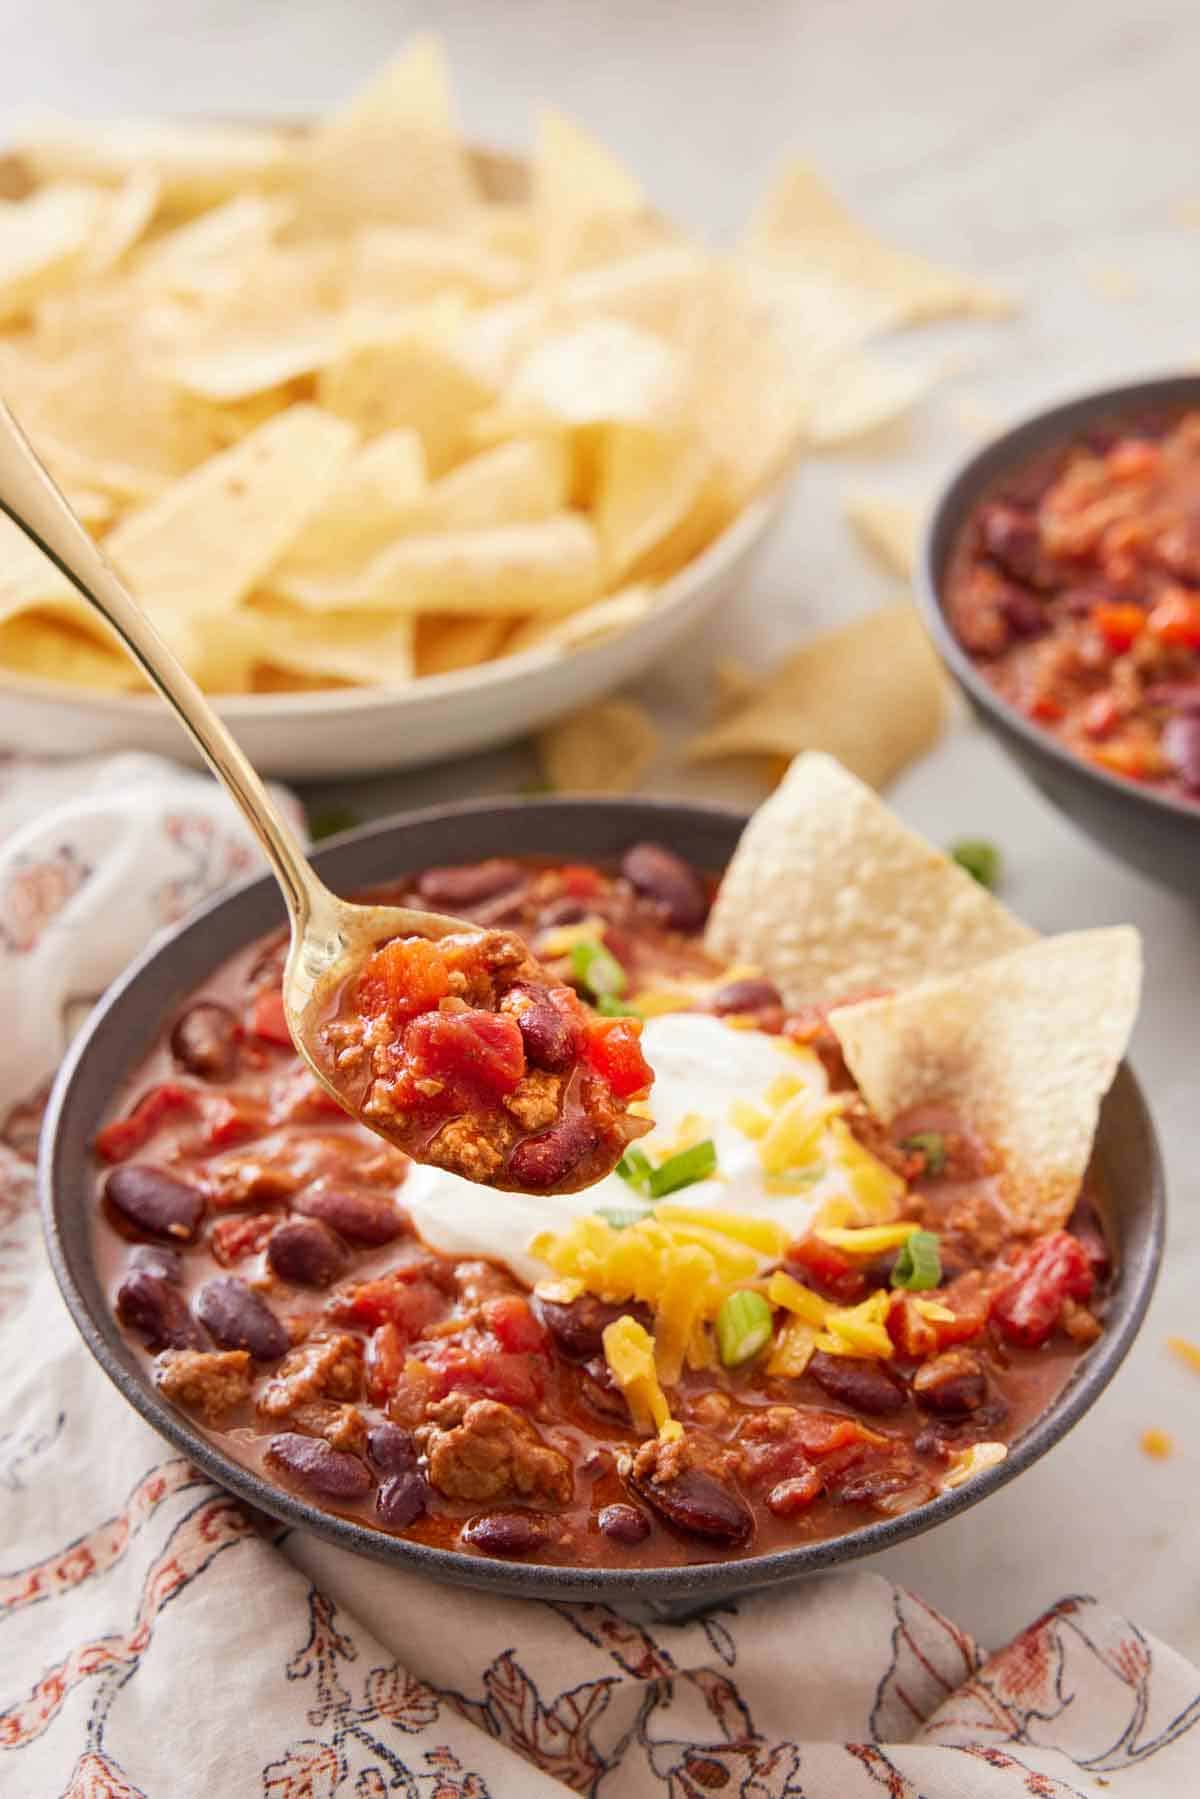 A spoonful of turkey chili lifted from a bowl. A bowl of chips in the background.